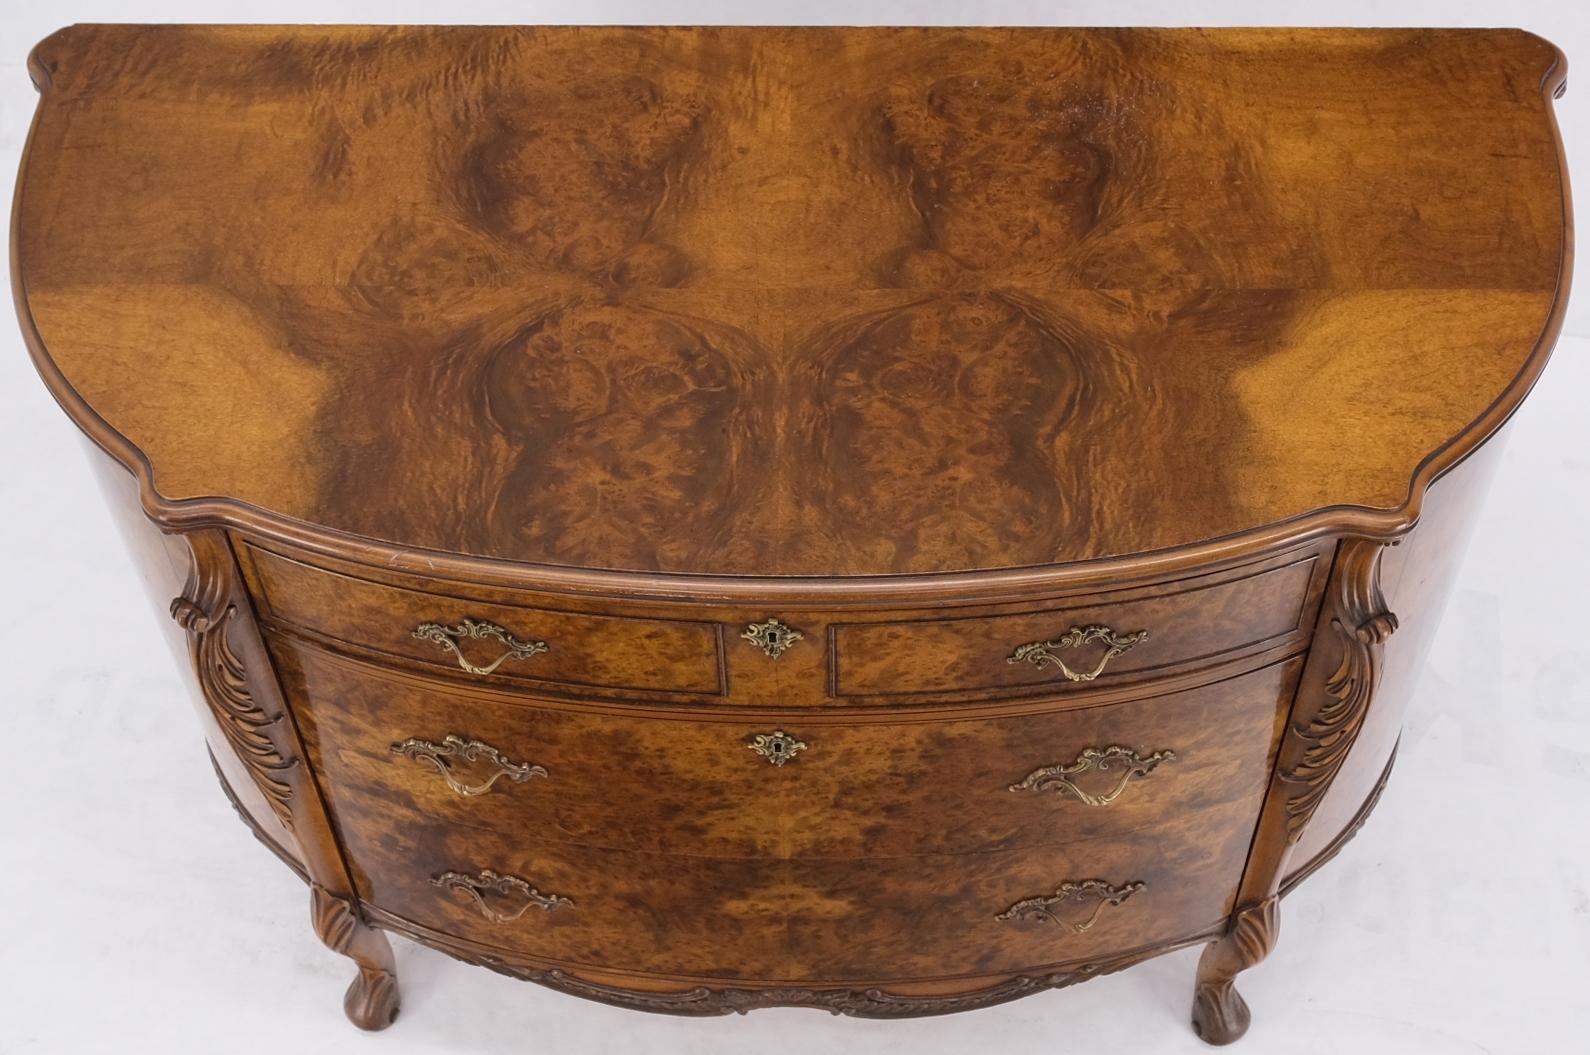 Bow Front Burl Wood 3 Drawer Carved Bombay Chest of Drawers Dresser Commode 9